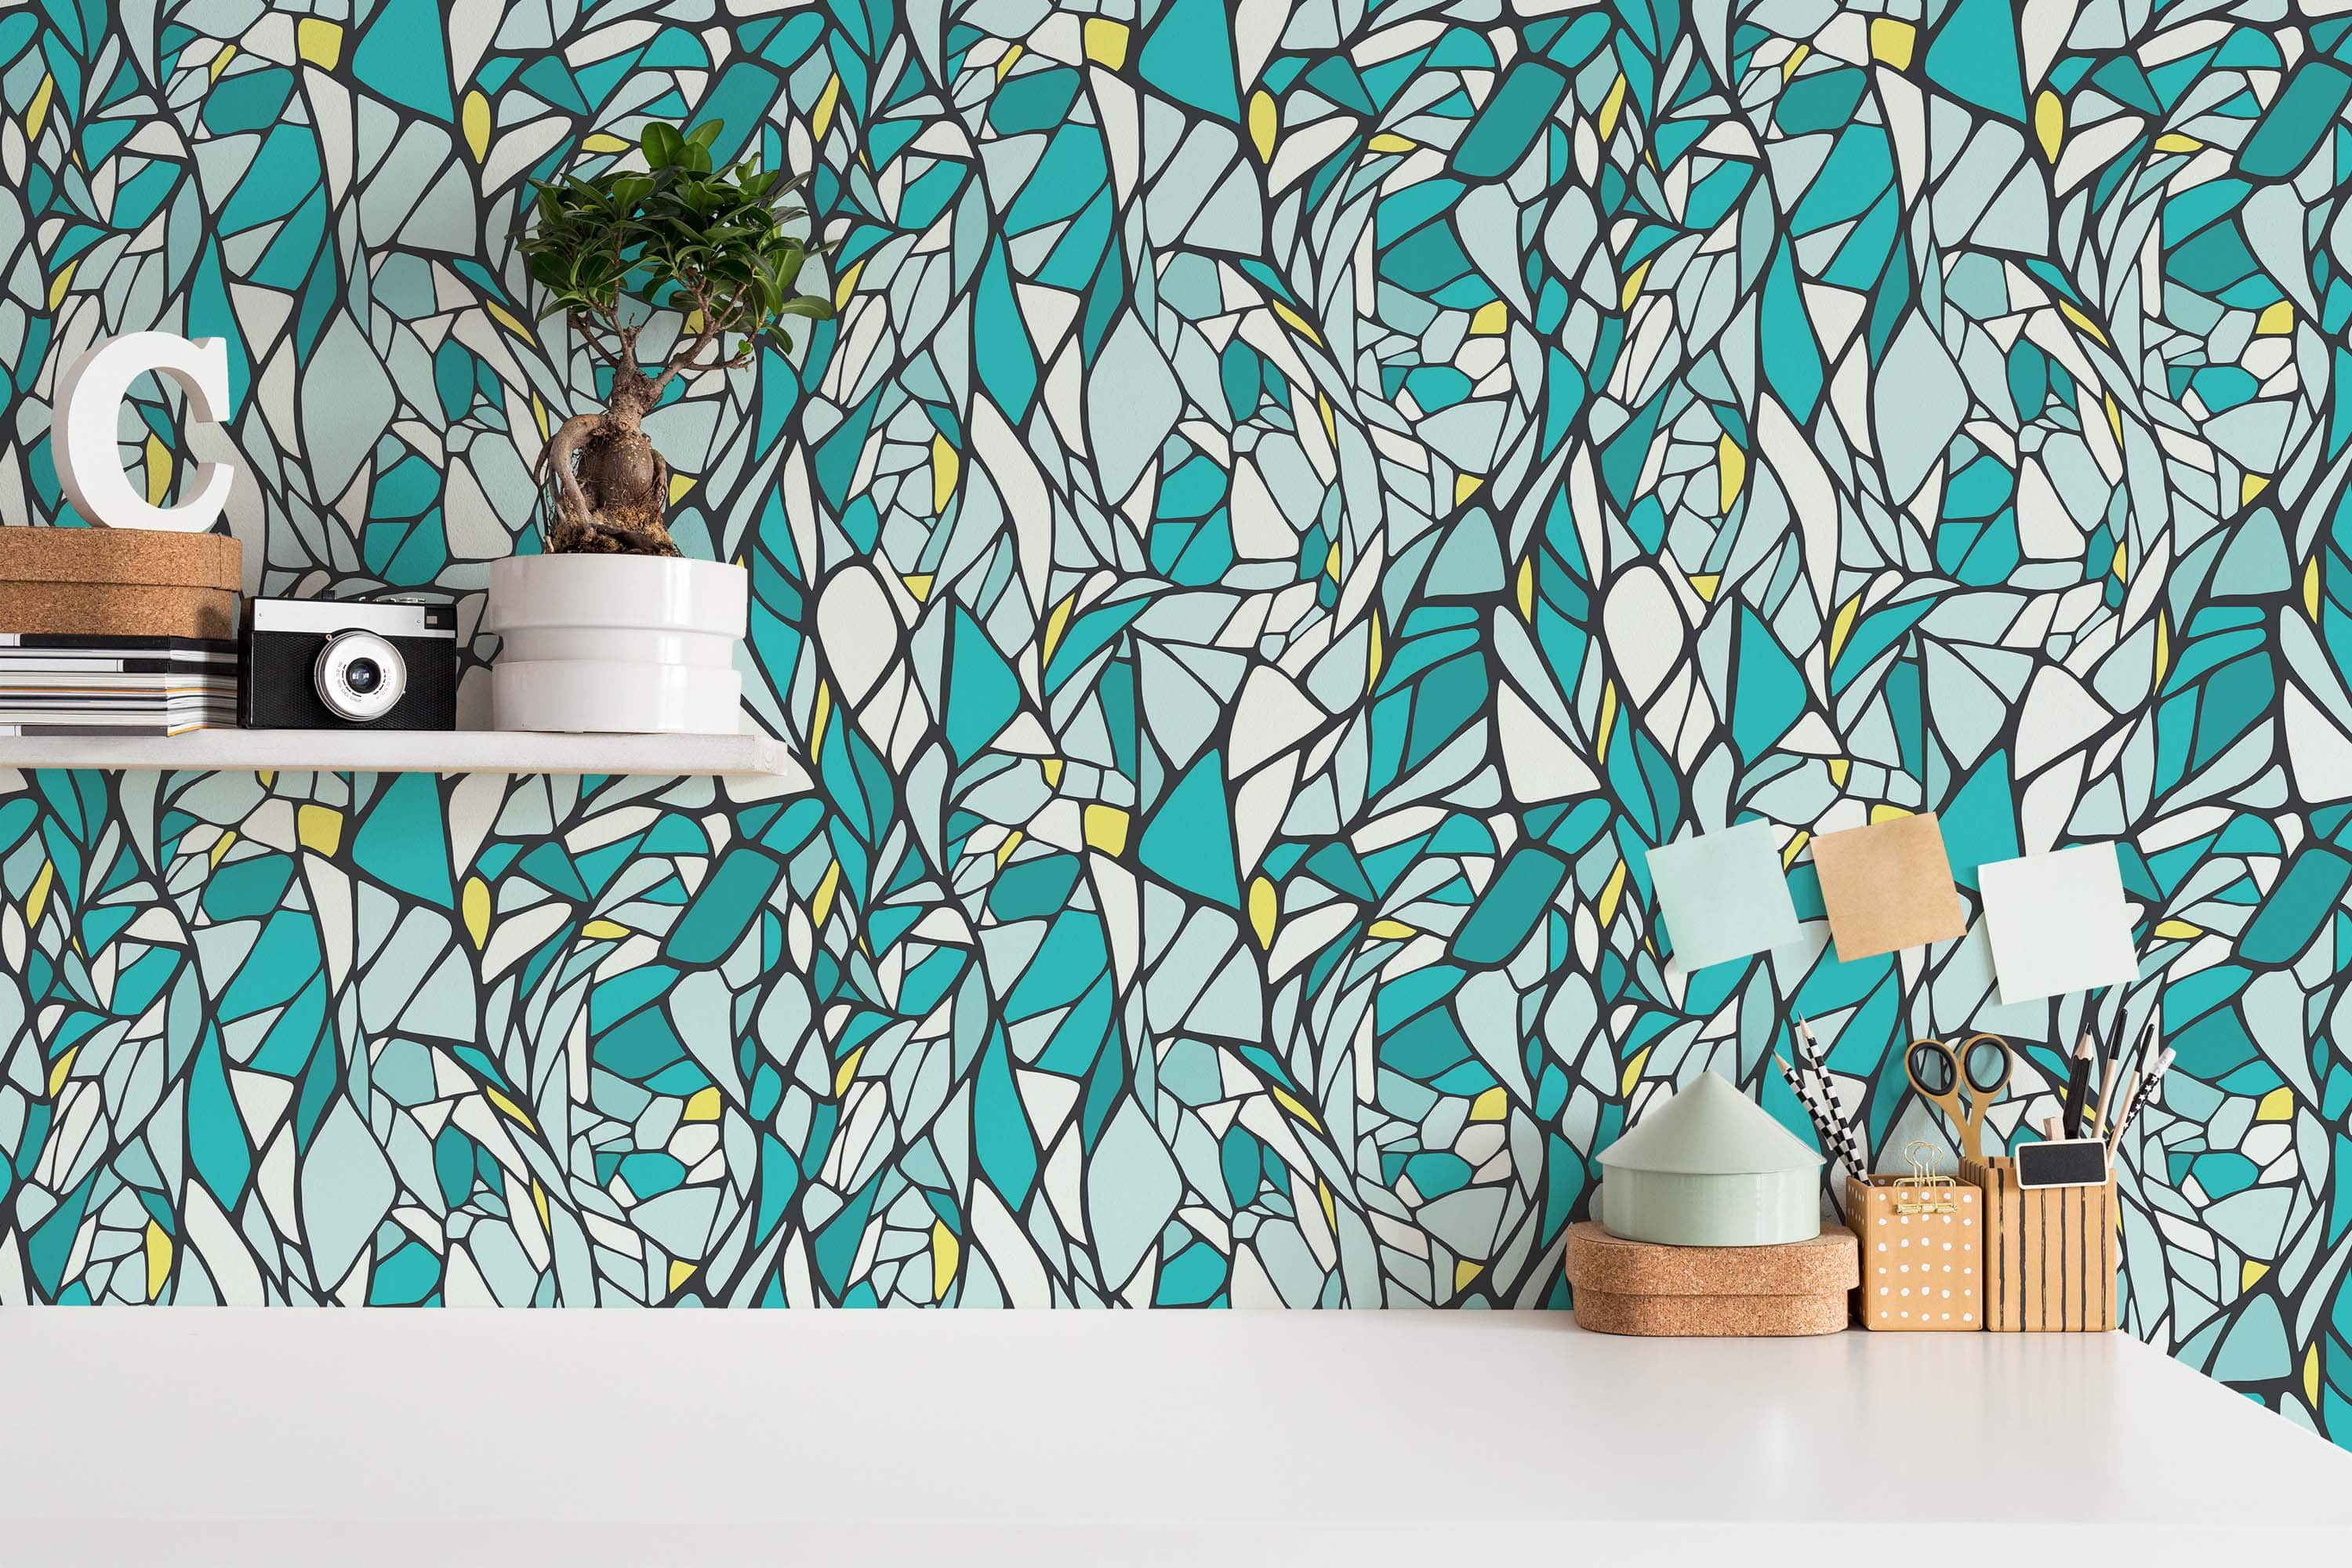 Mosaic wallpaper - Peel and Stick or Non-Pasted